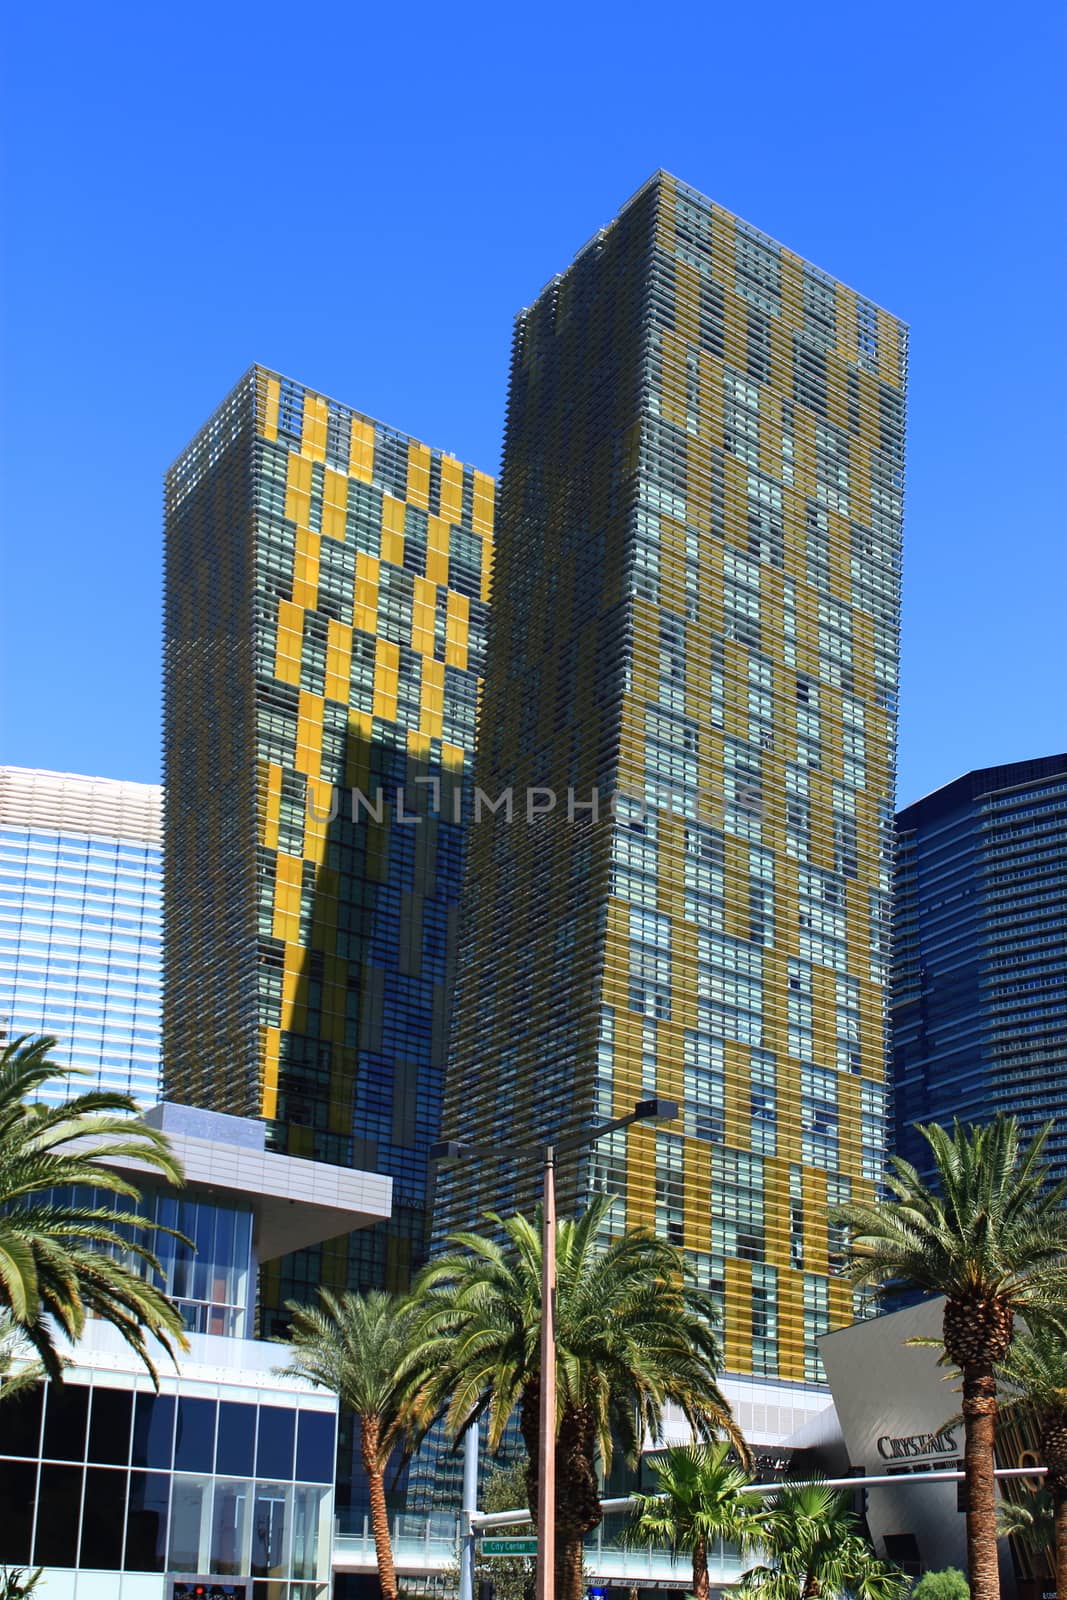 Las Vegas City Center Complex by Ffooter